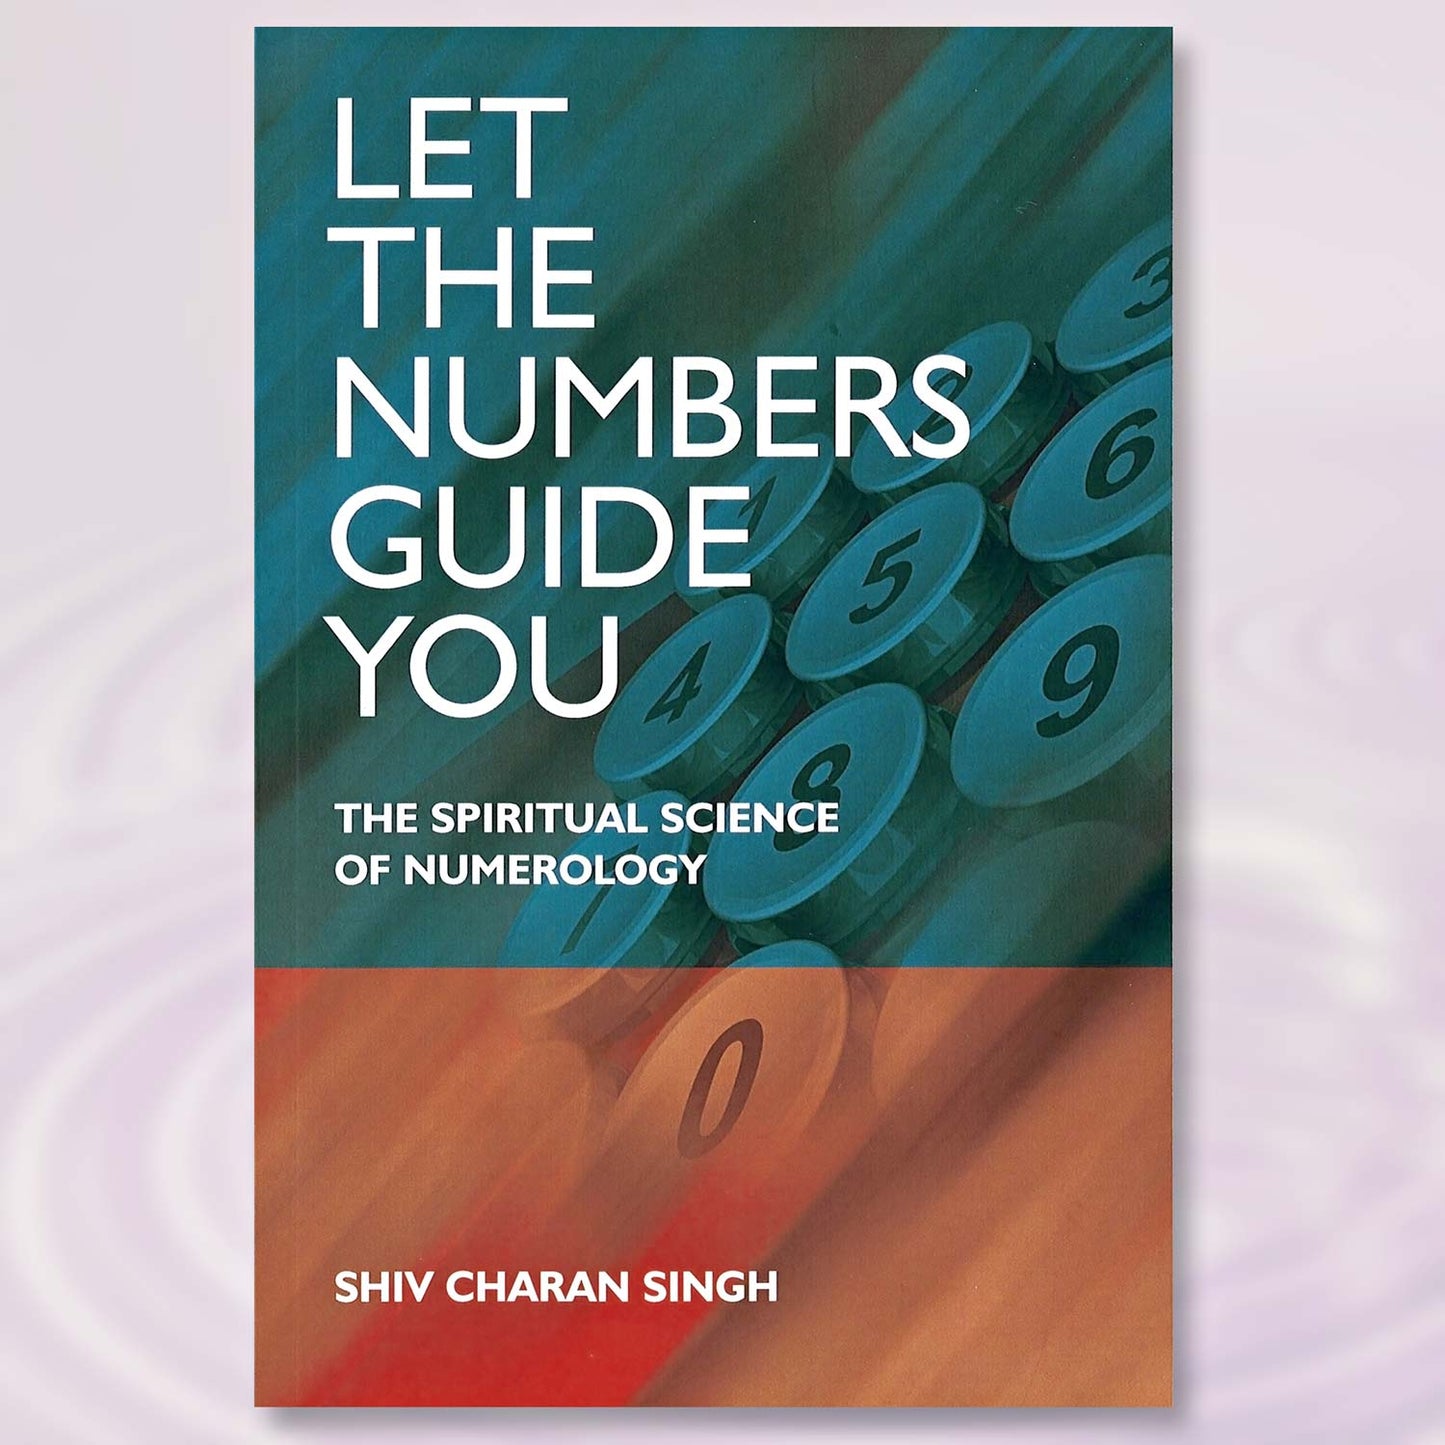 Let The Numbers Guide You - Shiv Charan Singh